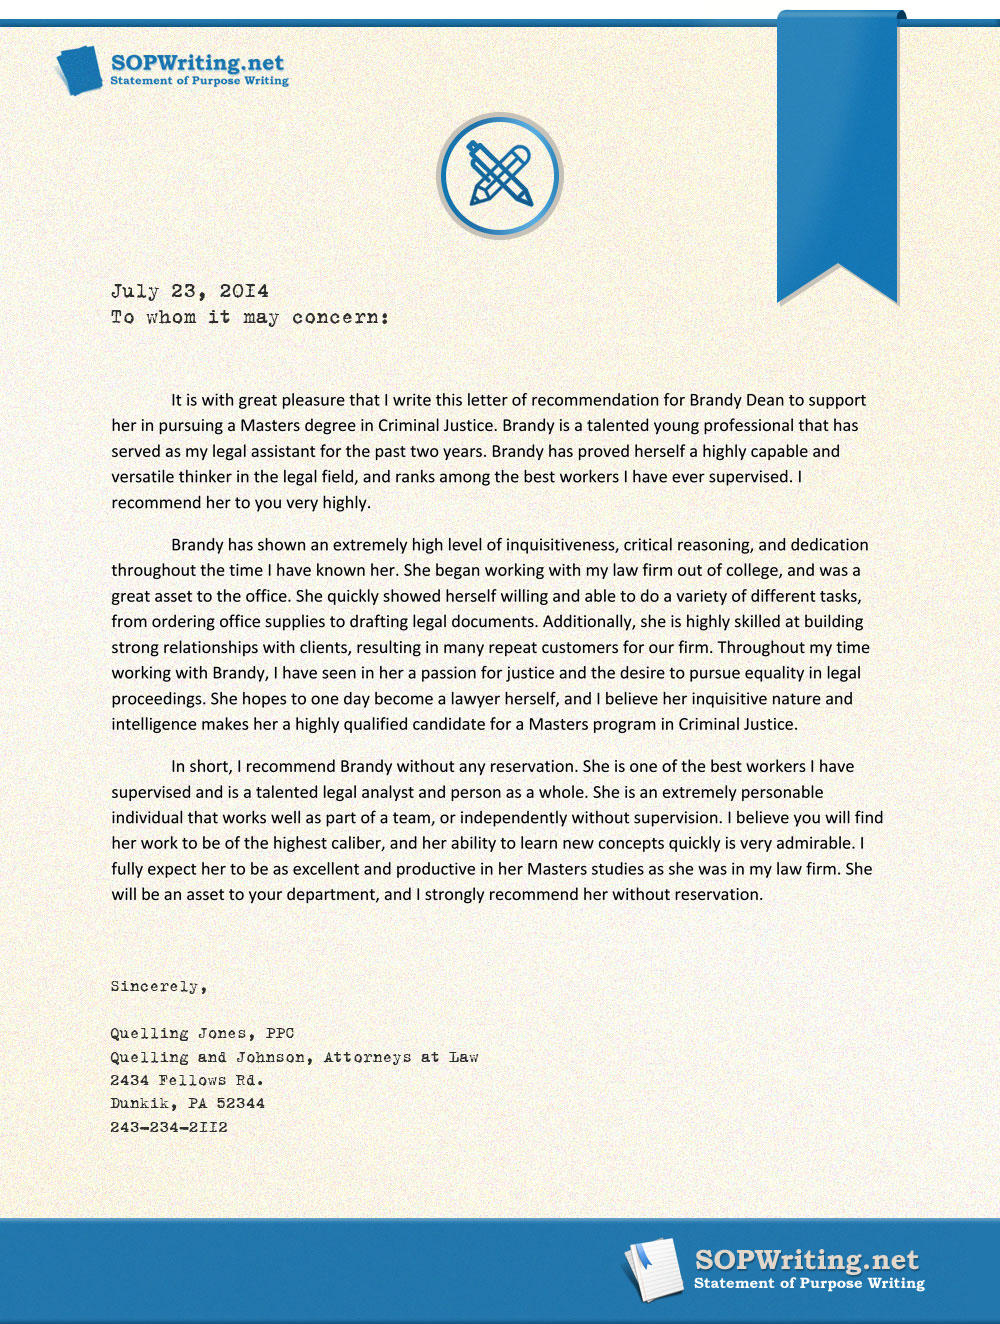 Effectively Written Sample Letter Of Recommendation For Ms for dimensions 1000 X 1324